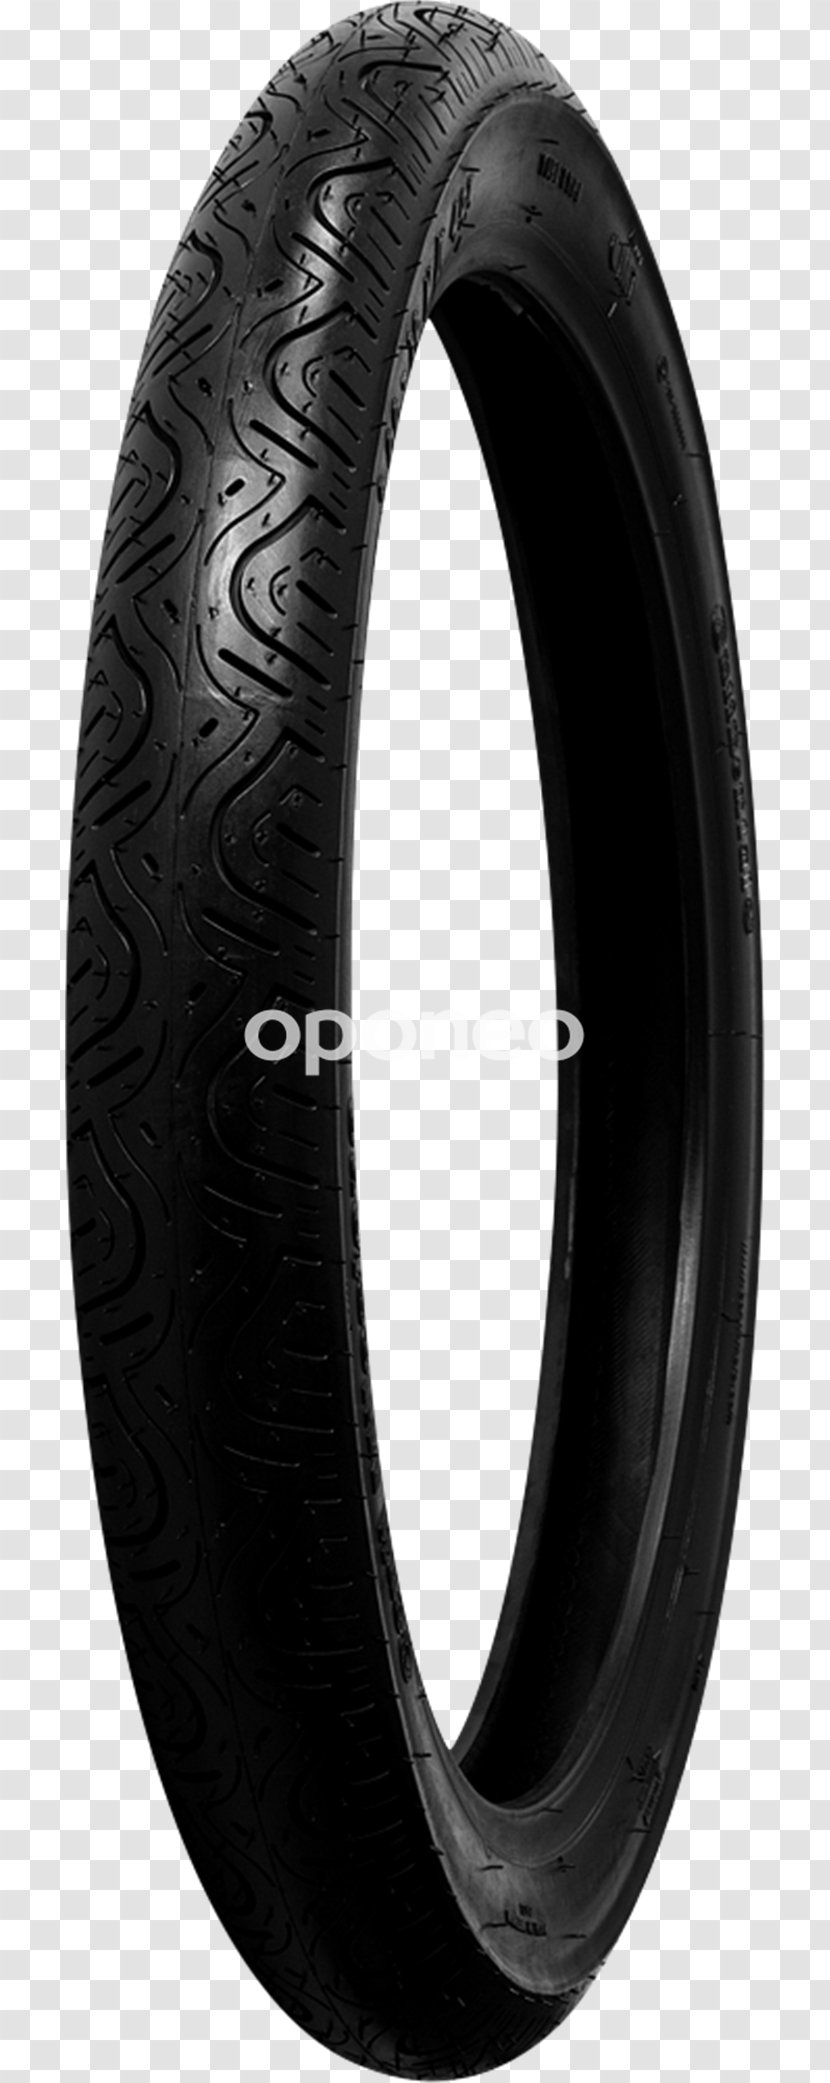 Scooter Motorcycle Tires Vehicle - Cruiser - Continental Carved Transparent PNG